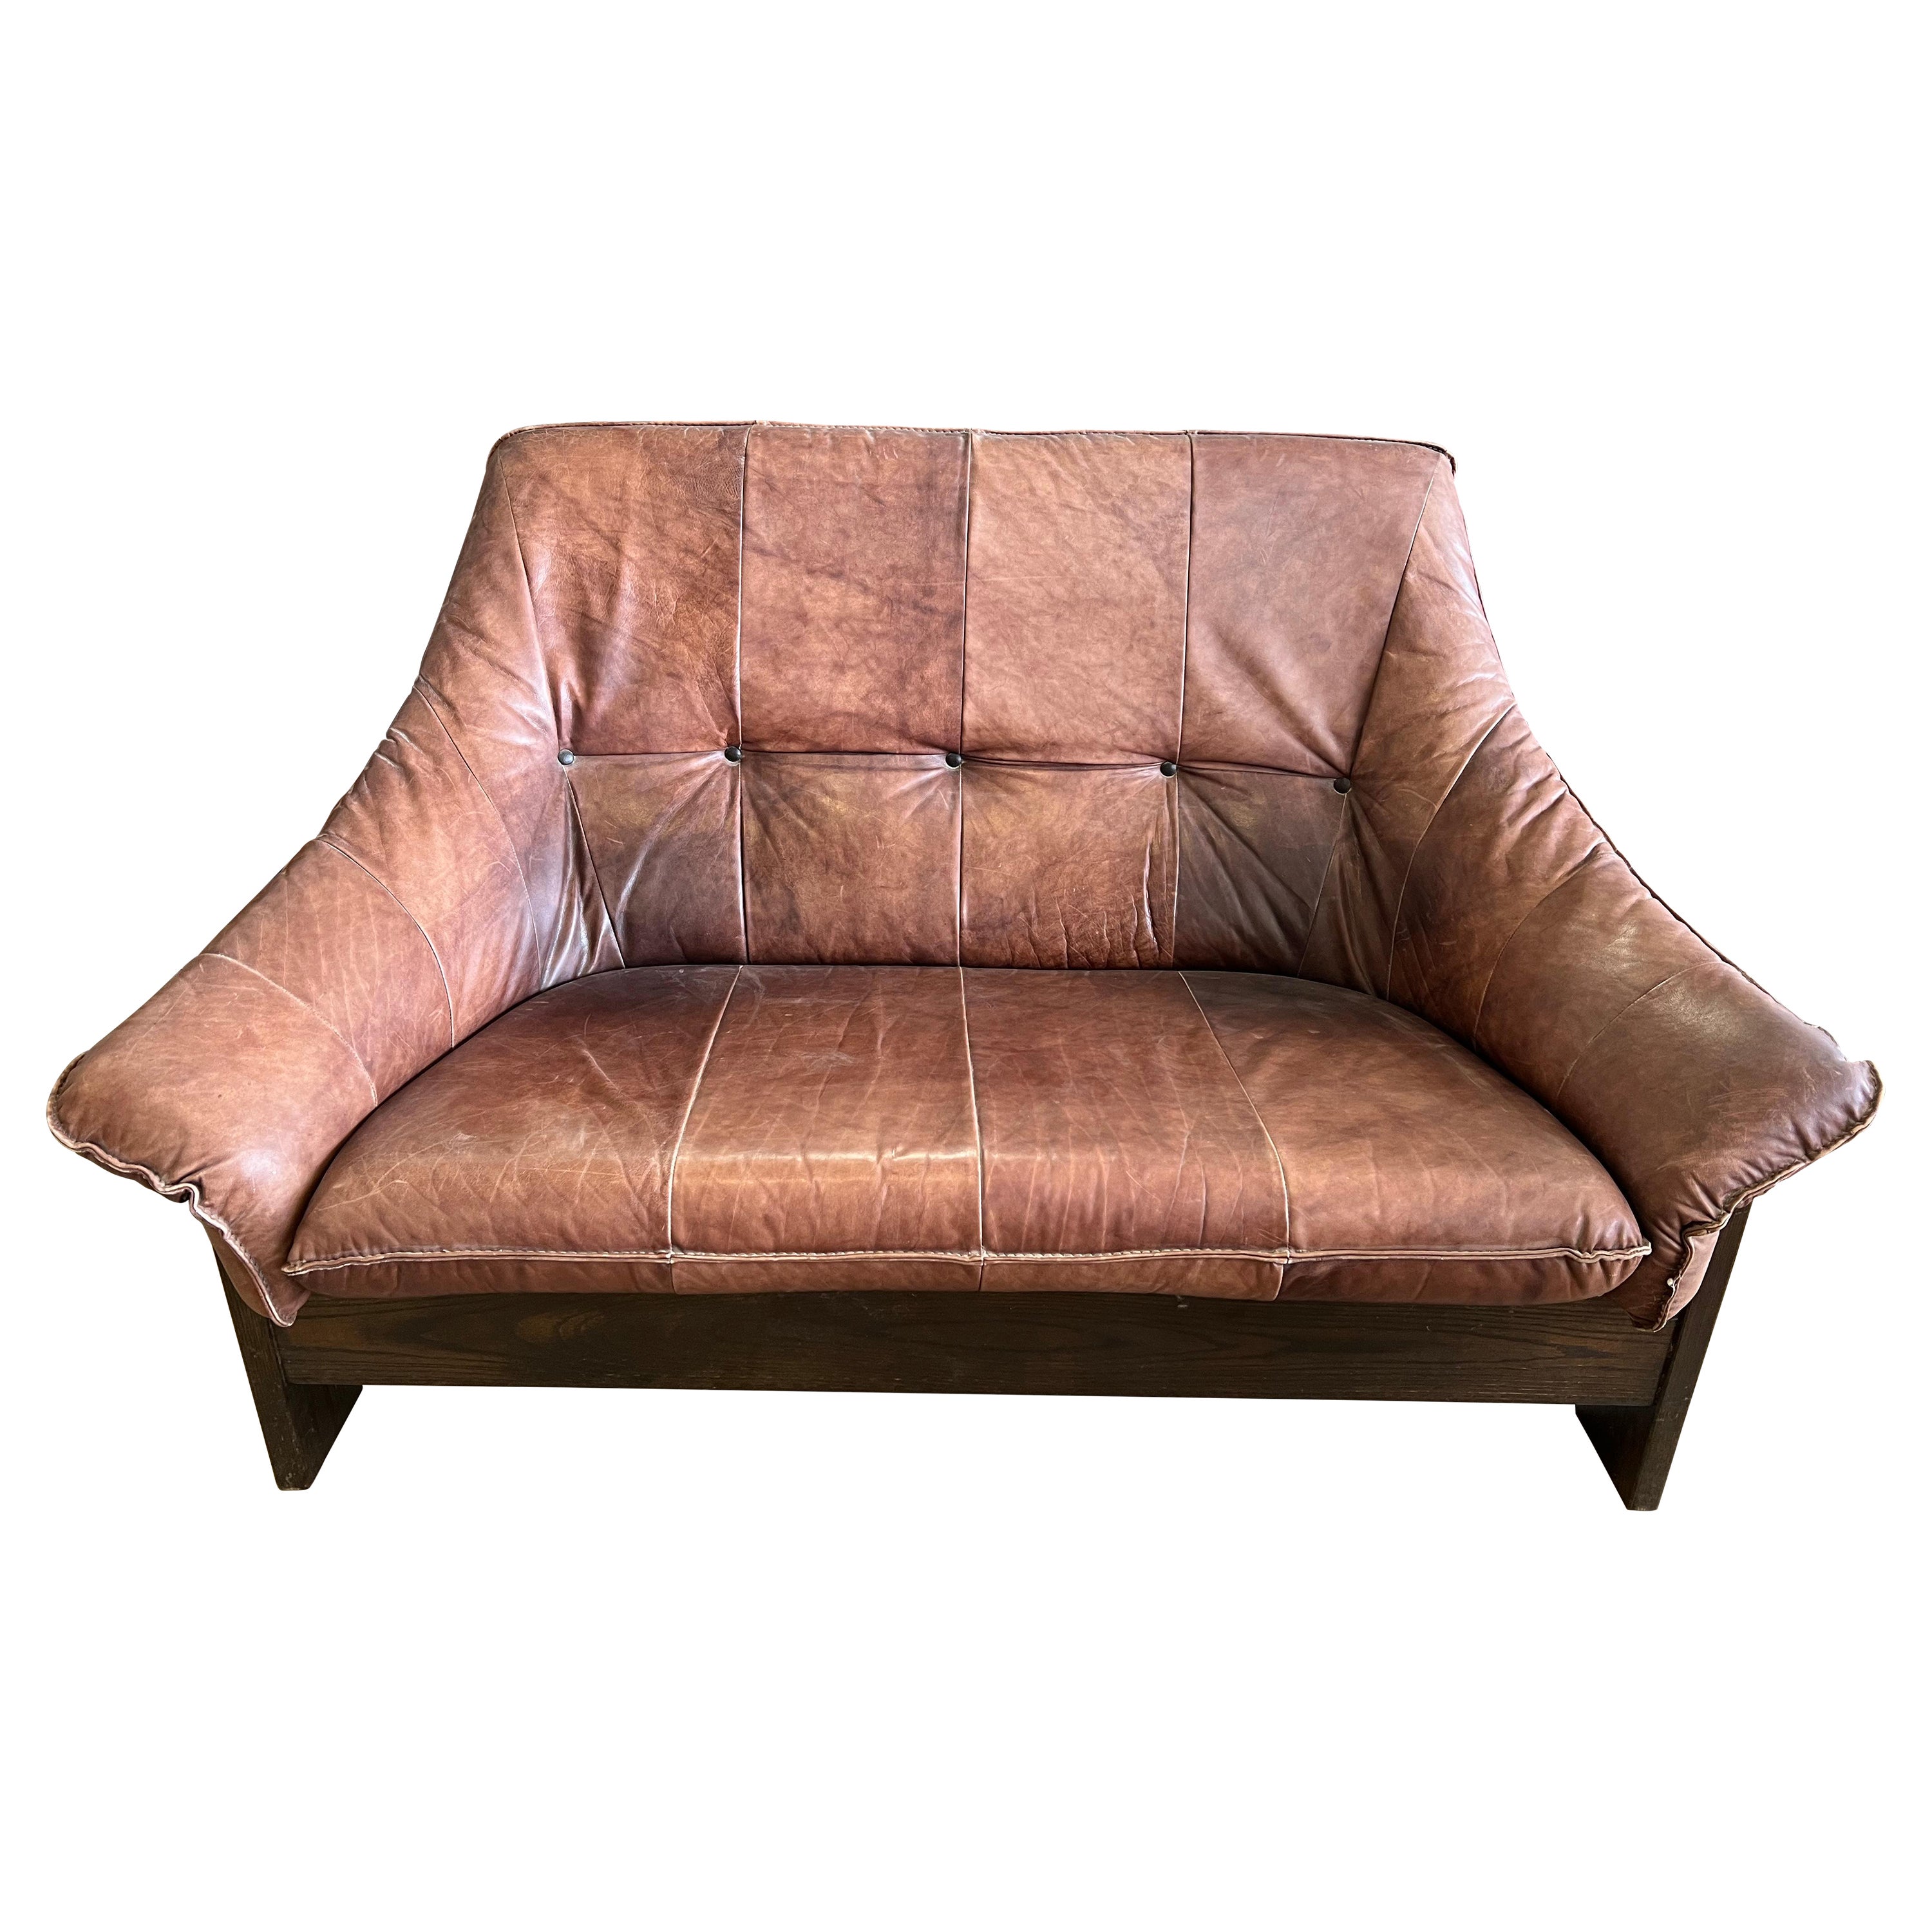 1970’s Swedish Leather Settee For Sale